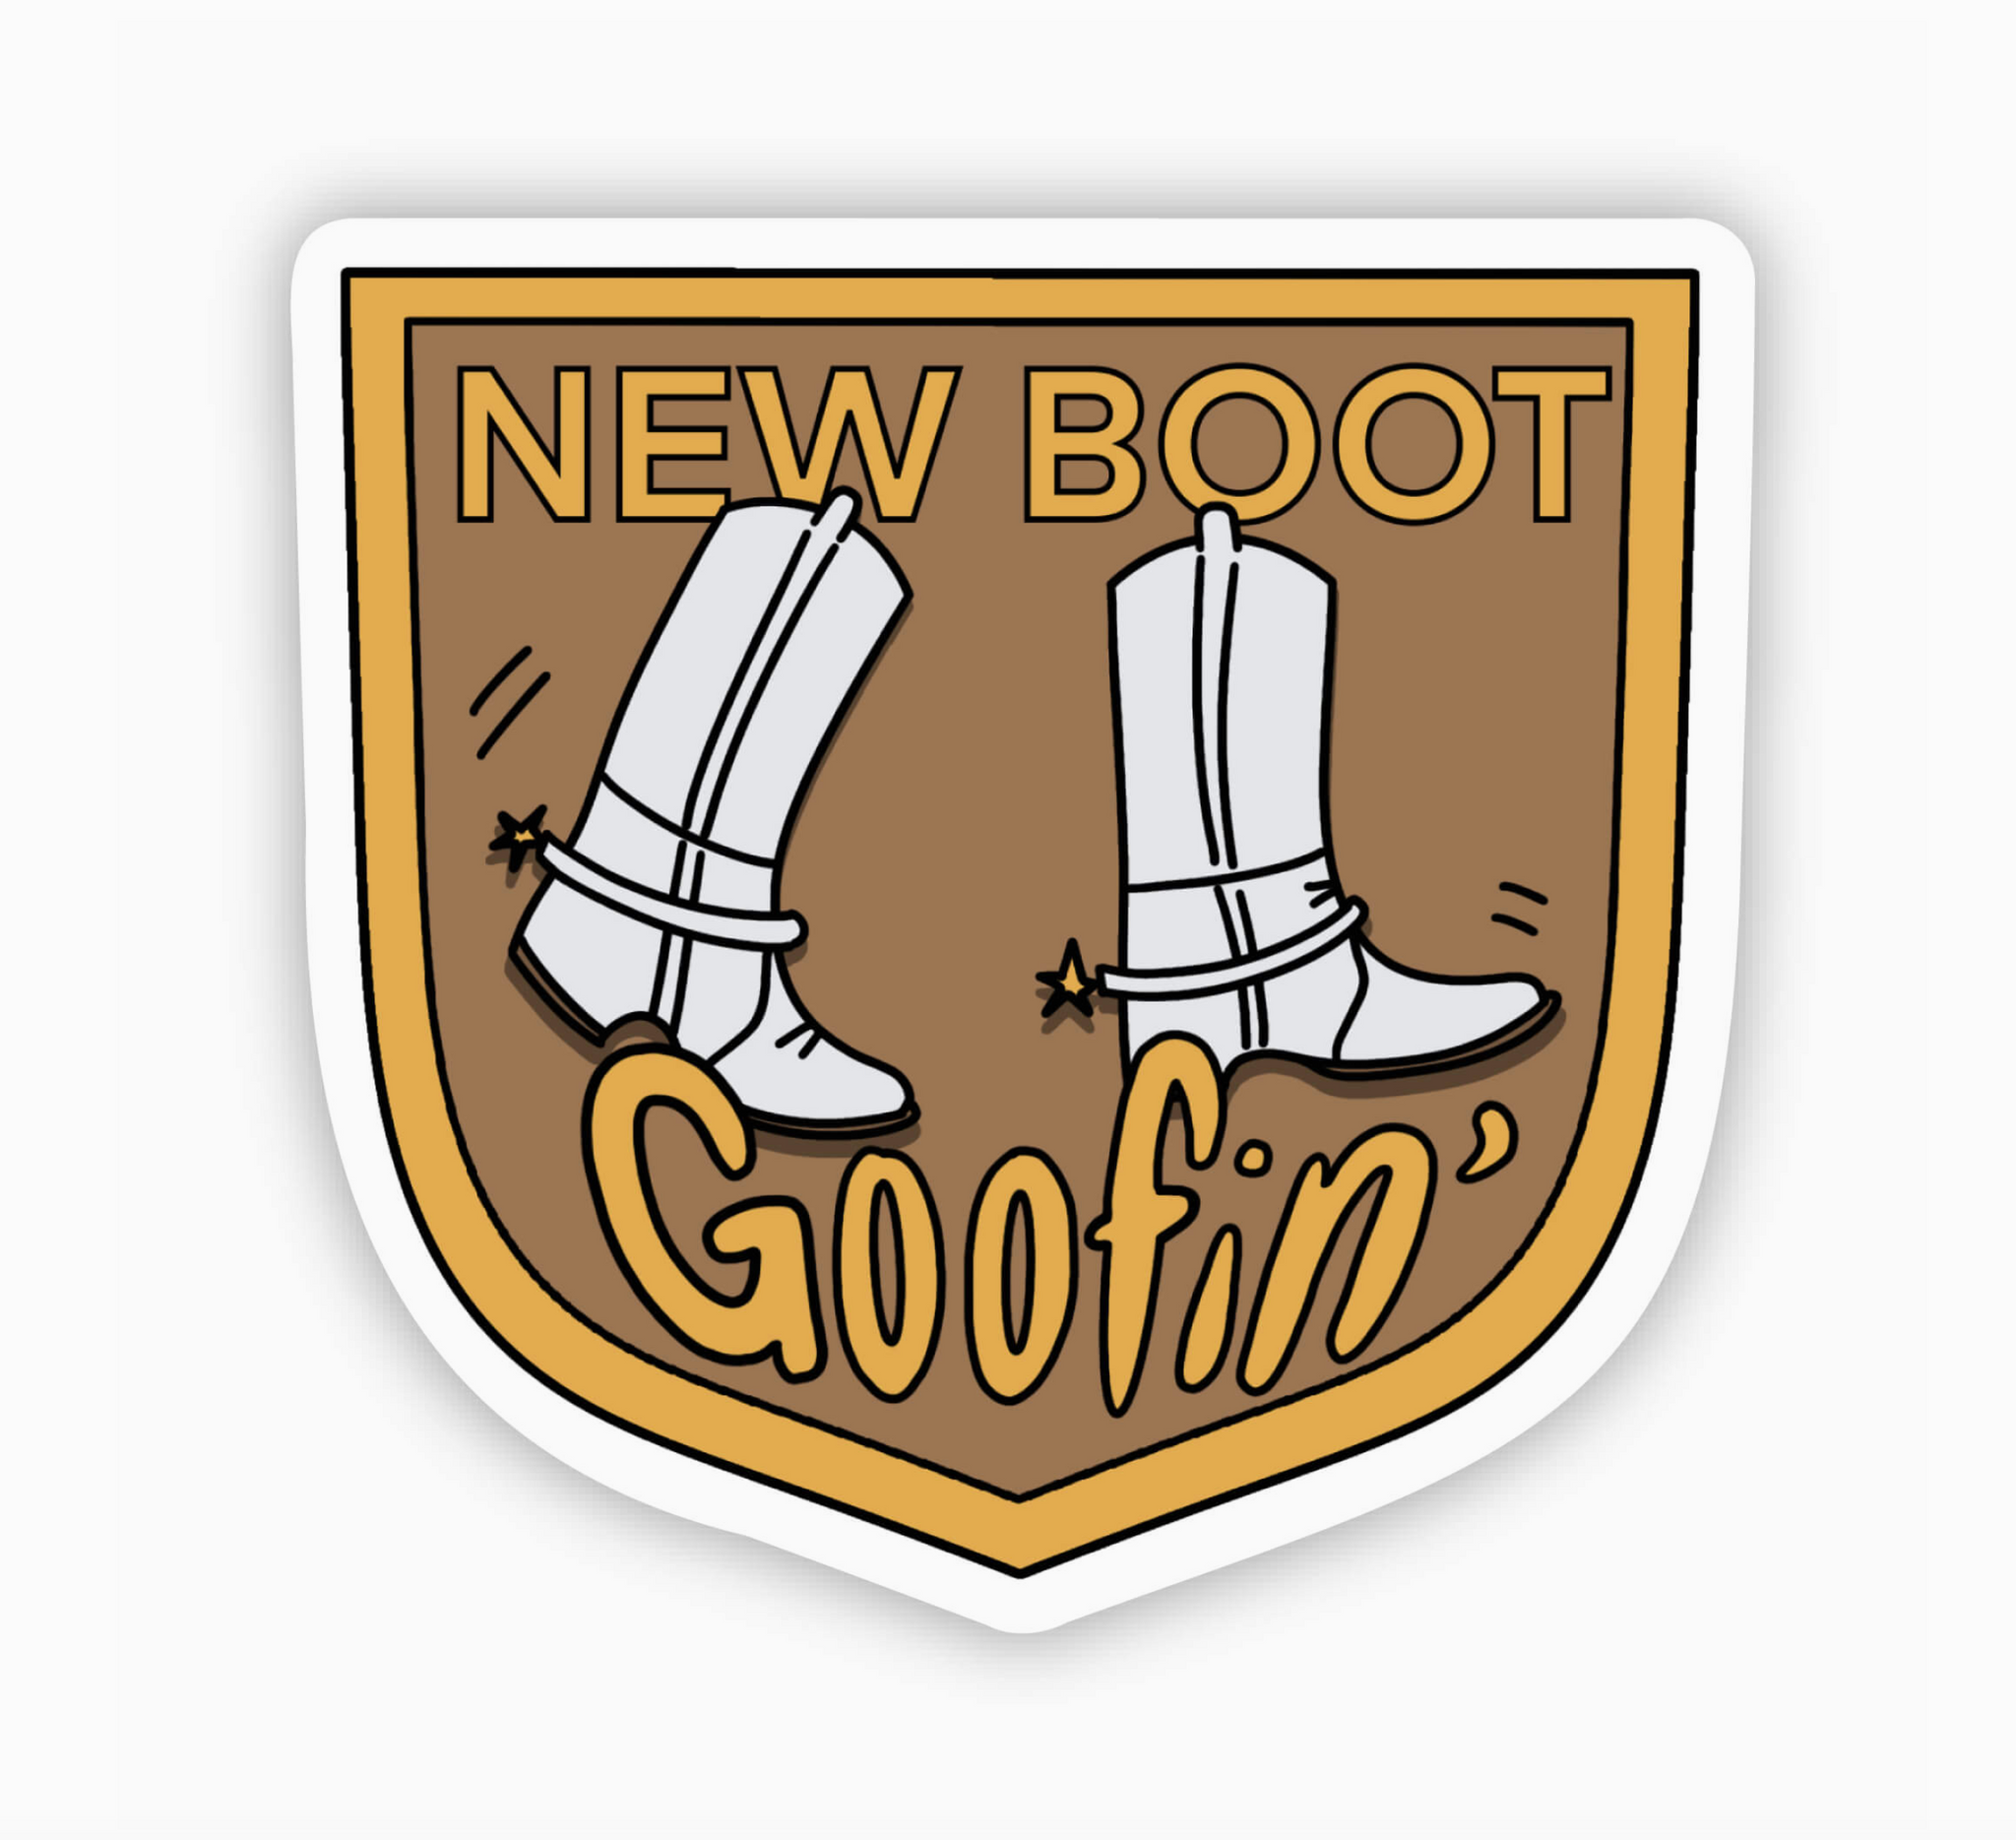 New Boot Goofin' Sticker by big moods sold by Le Monkey House